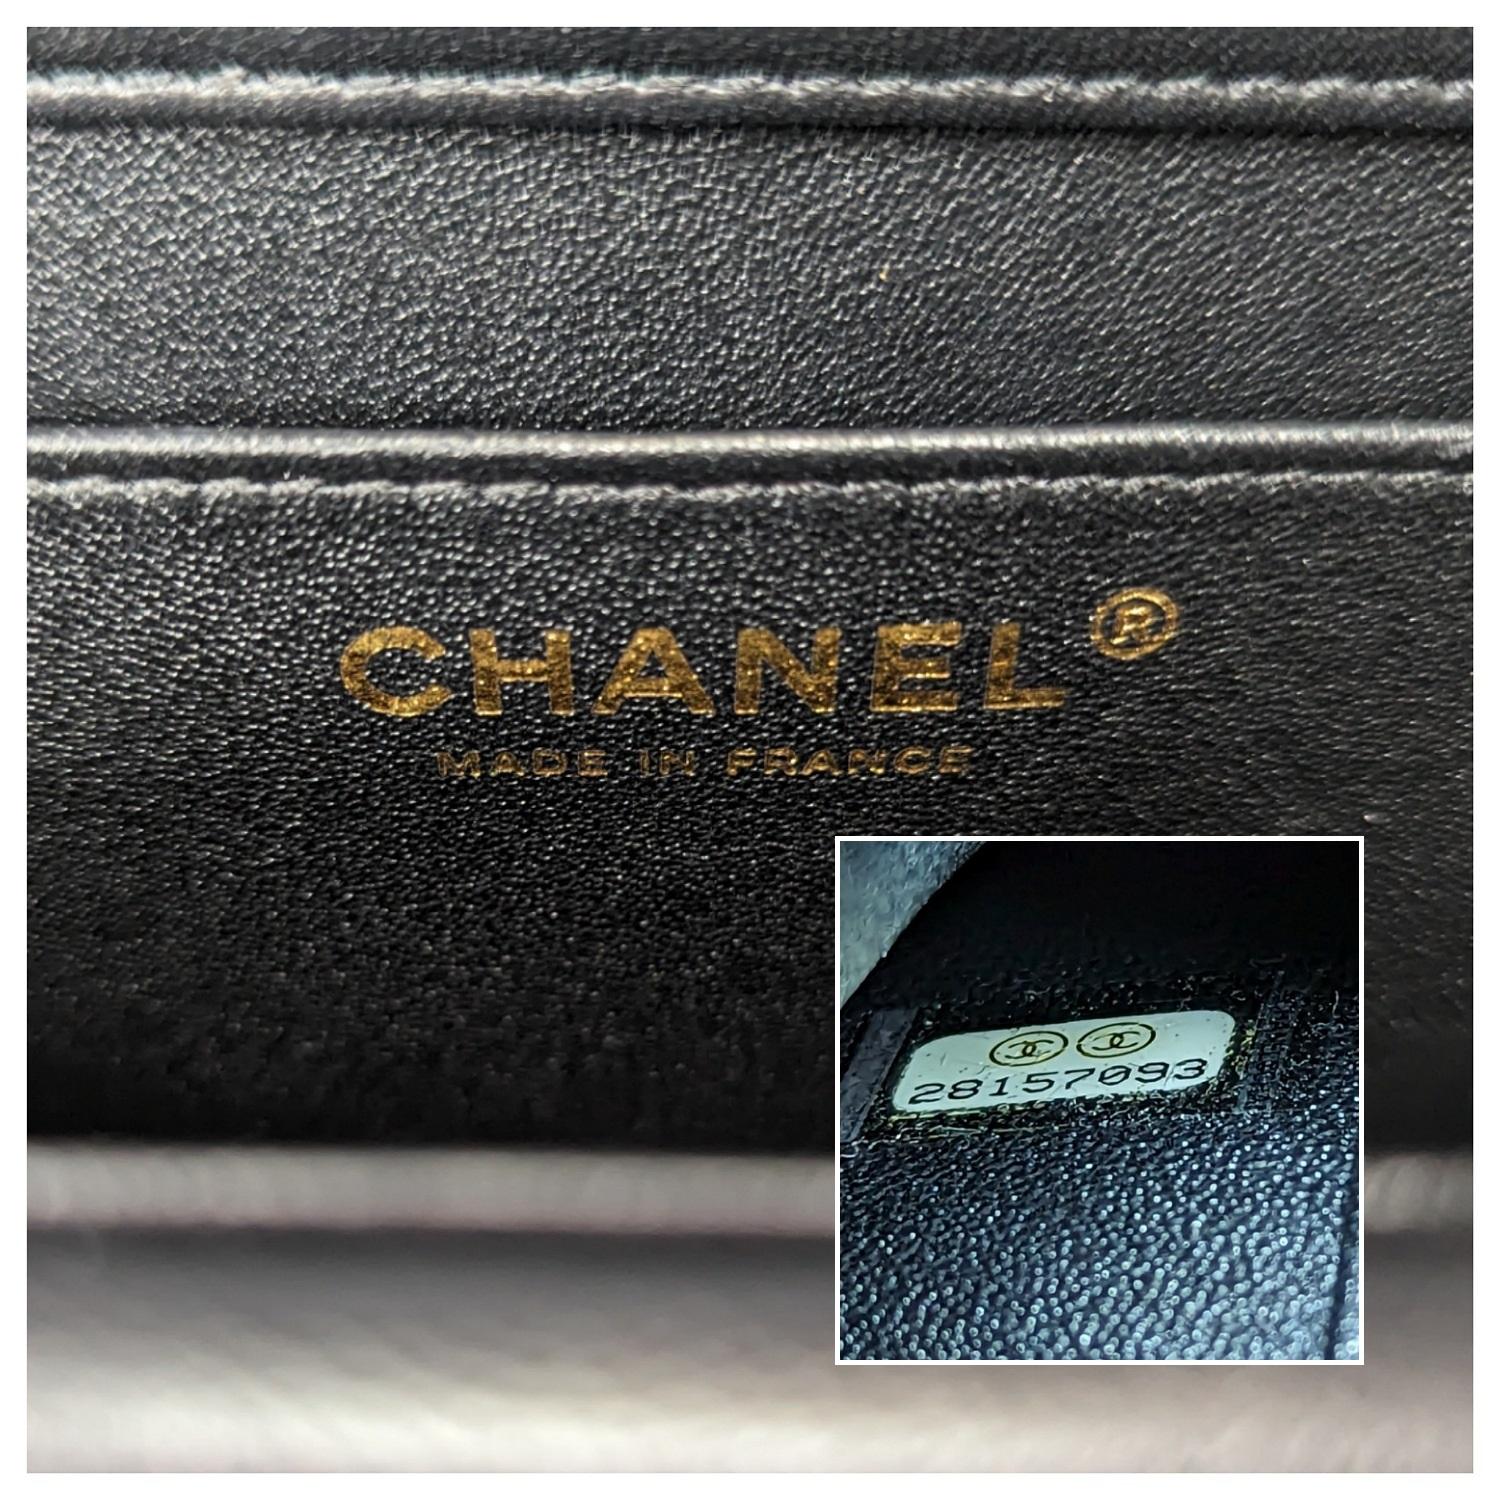 Chanel Black Lambskin Ancient Egypt Inspired Clutch 5